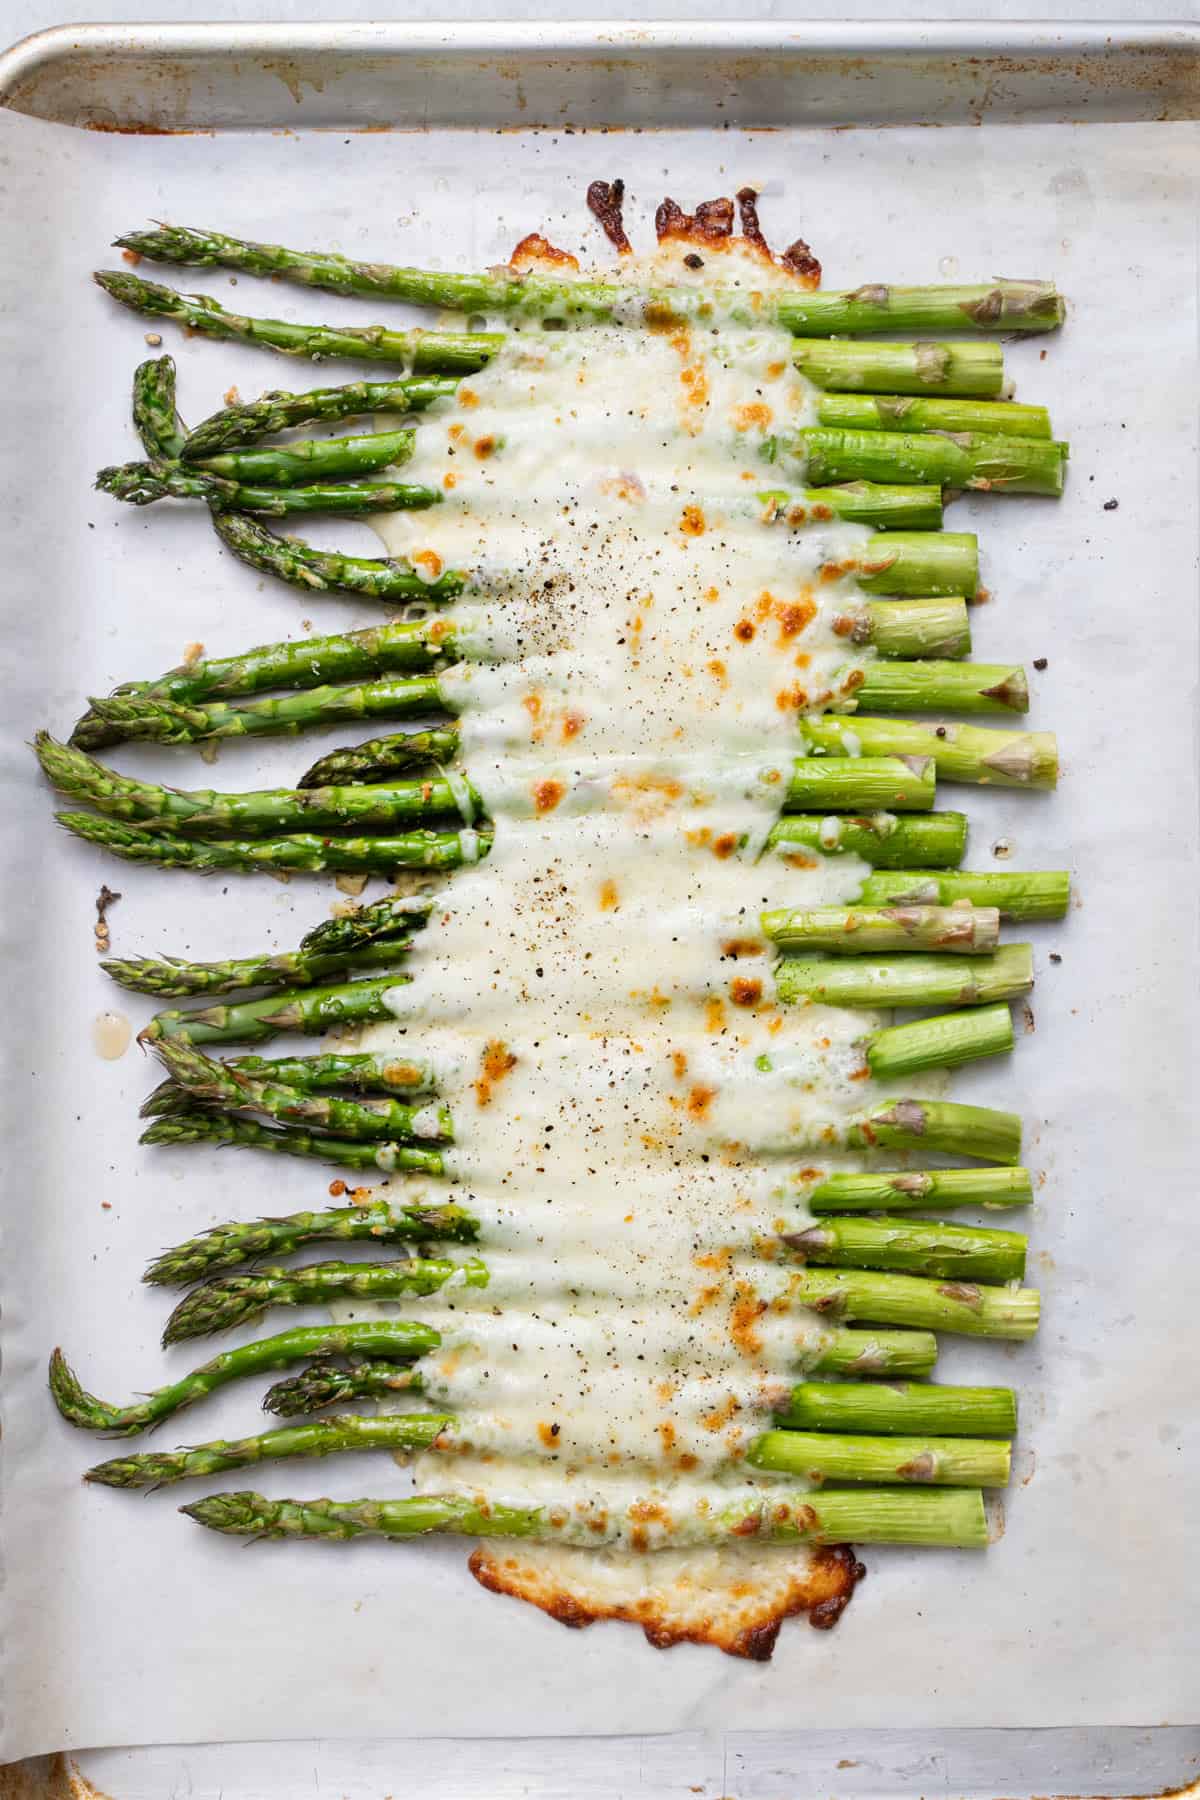 Oven roasted asparagus on parchment paper with melty cheese on top